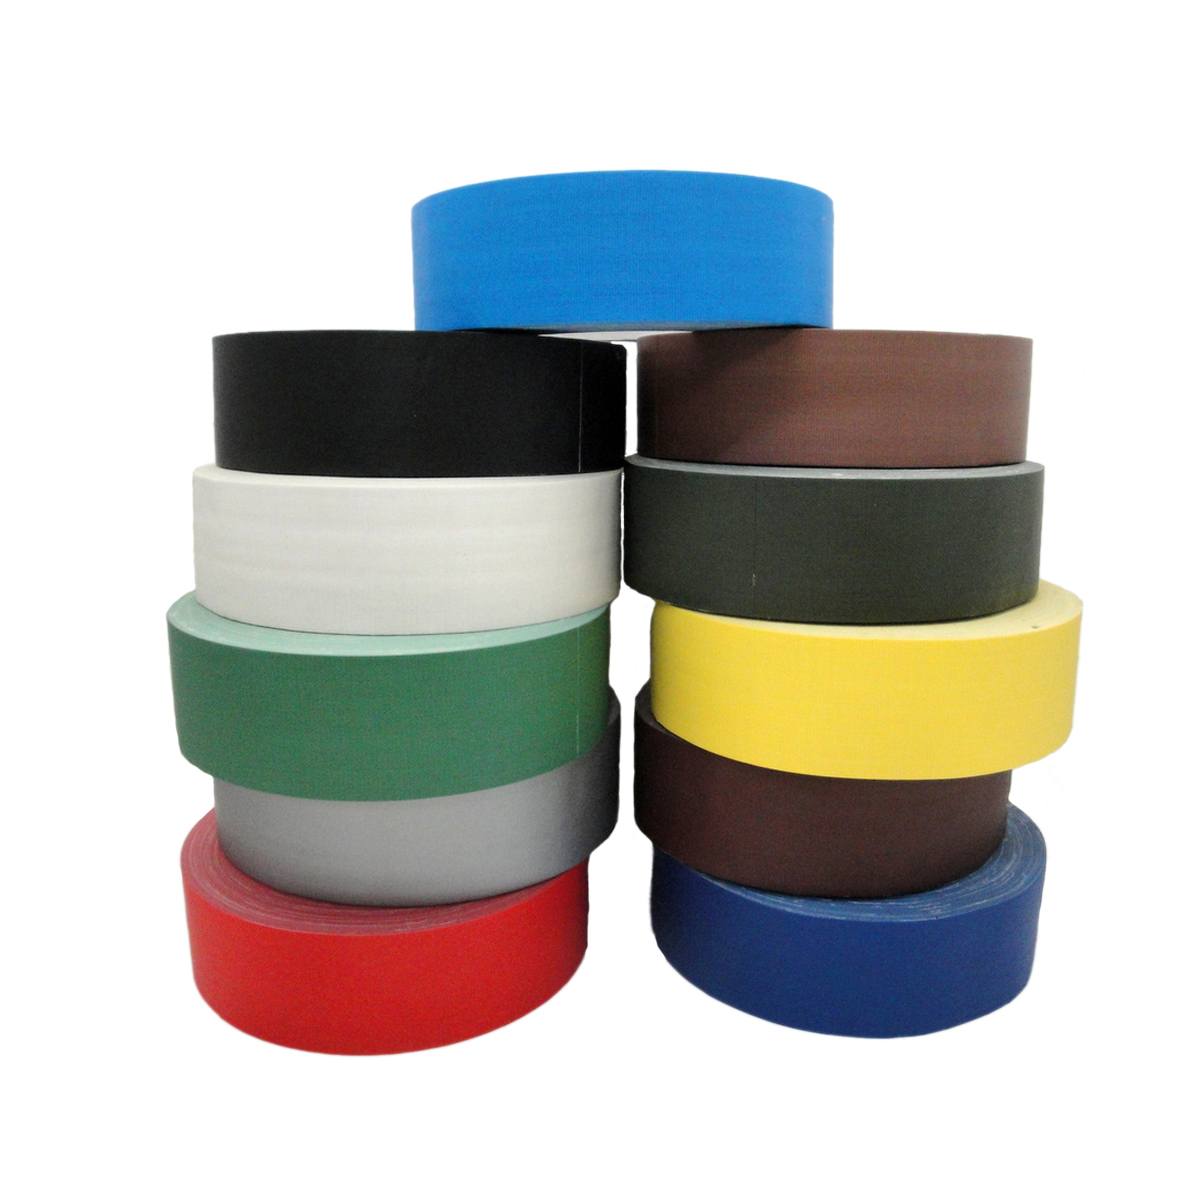 Colored Electrical Tape 3/4 in - 10 Pack (62018d)